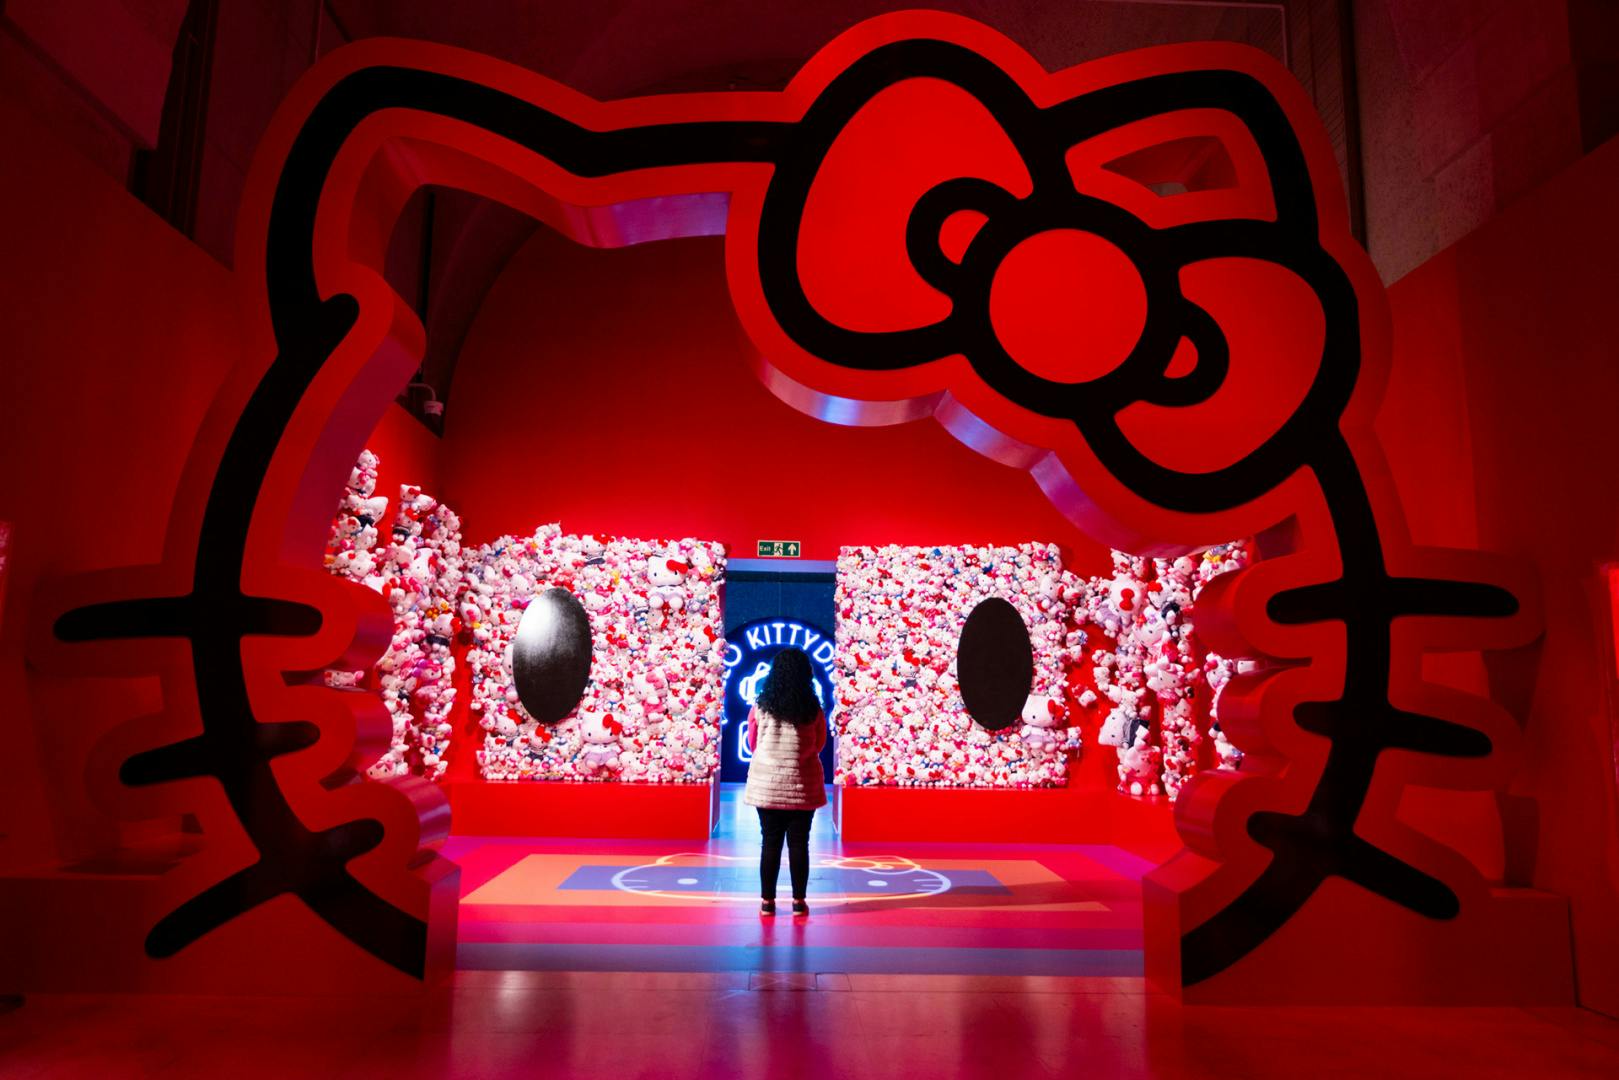 Photo of an archway made out of a Hello Kitty installation at the exhibition Cute at Somerset House